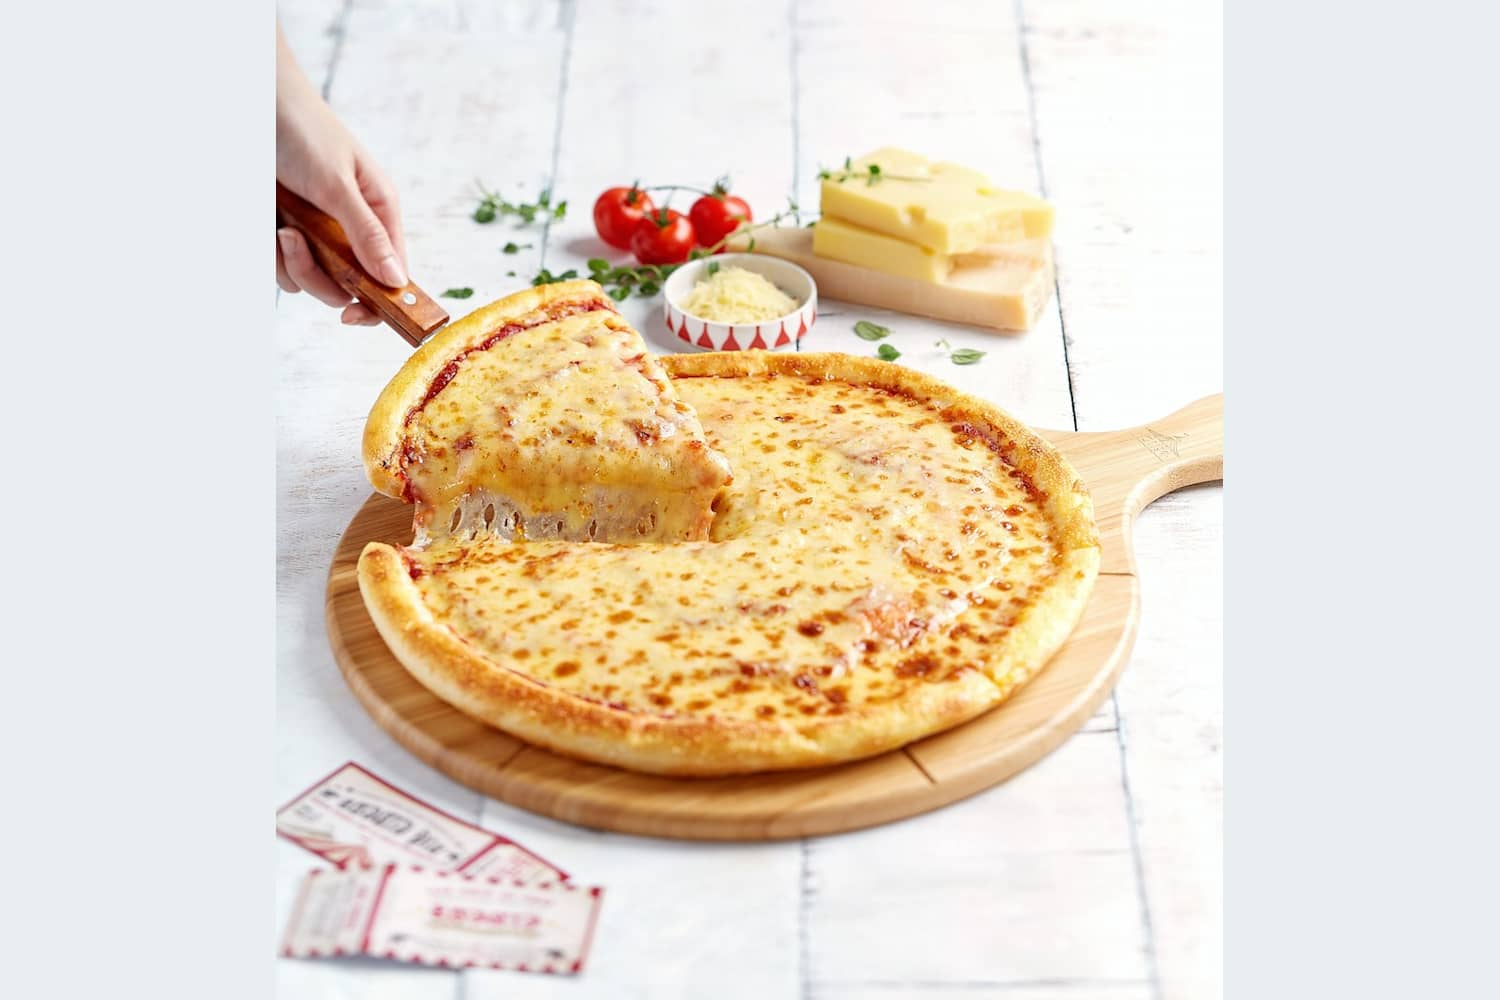 1 x cheesy cheese pizza slice - welcome deal